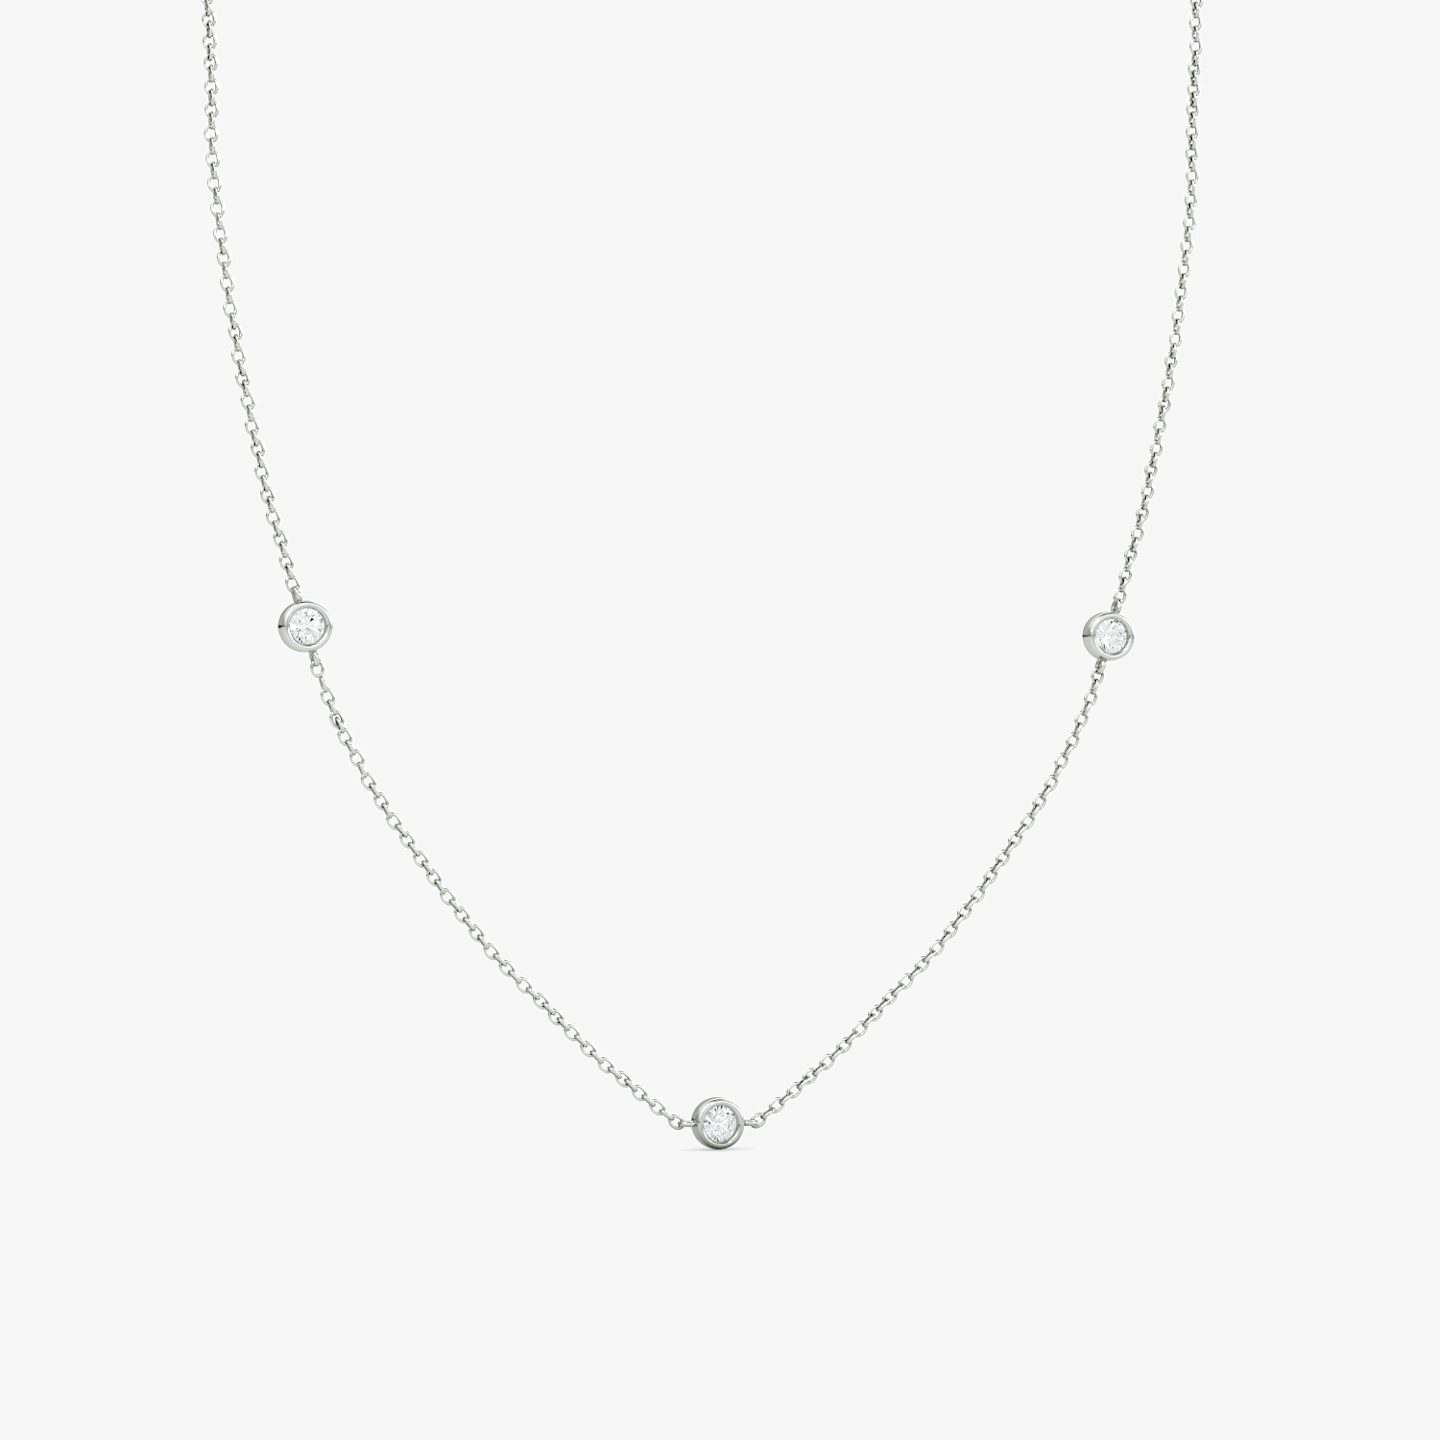 Silver Bezel Station Necklace | Round Brilliant | Sterling Silver | Diamond count: 3 | Chain length: 16-18